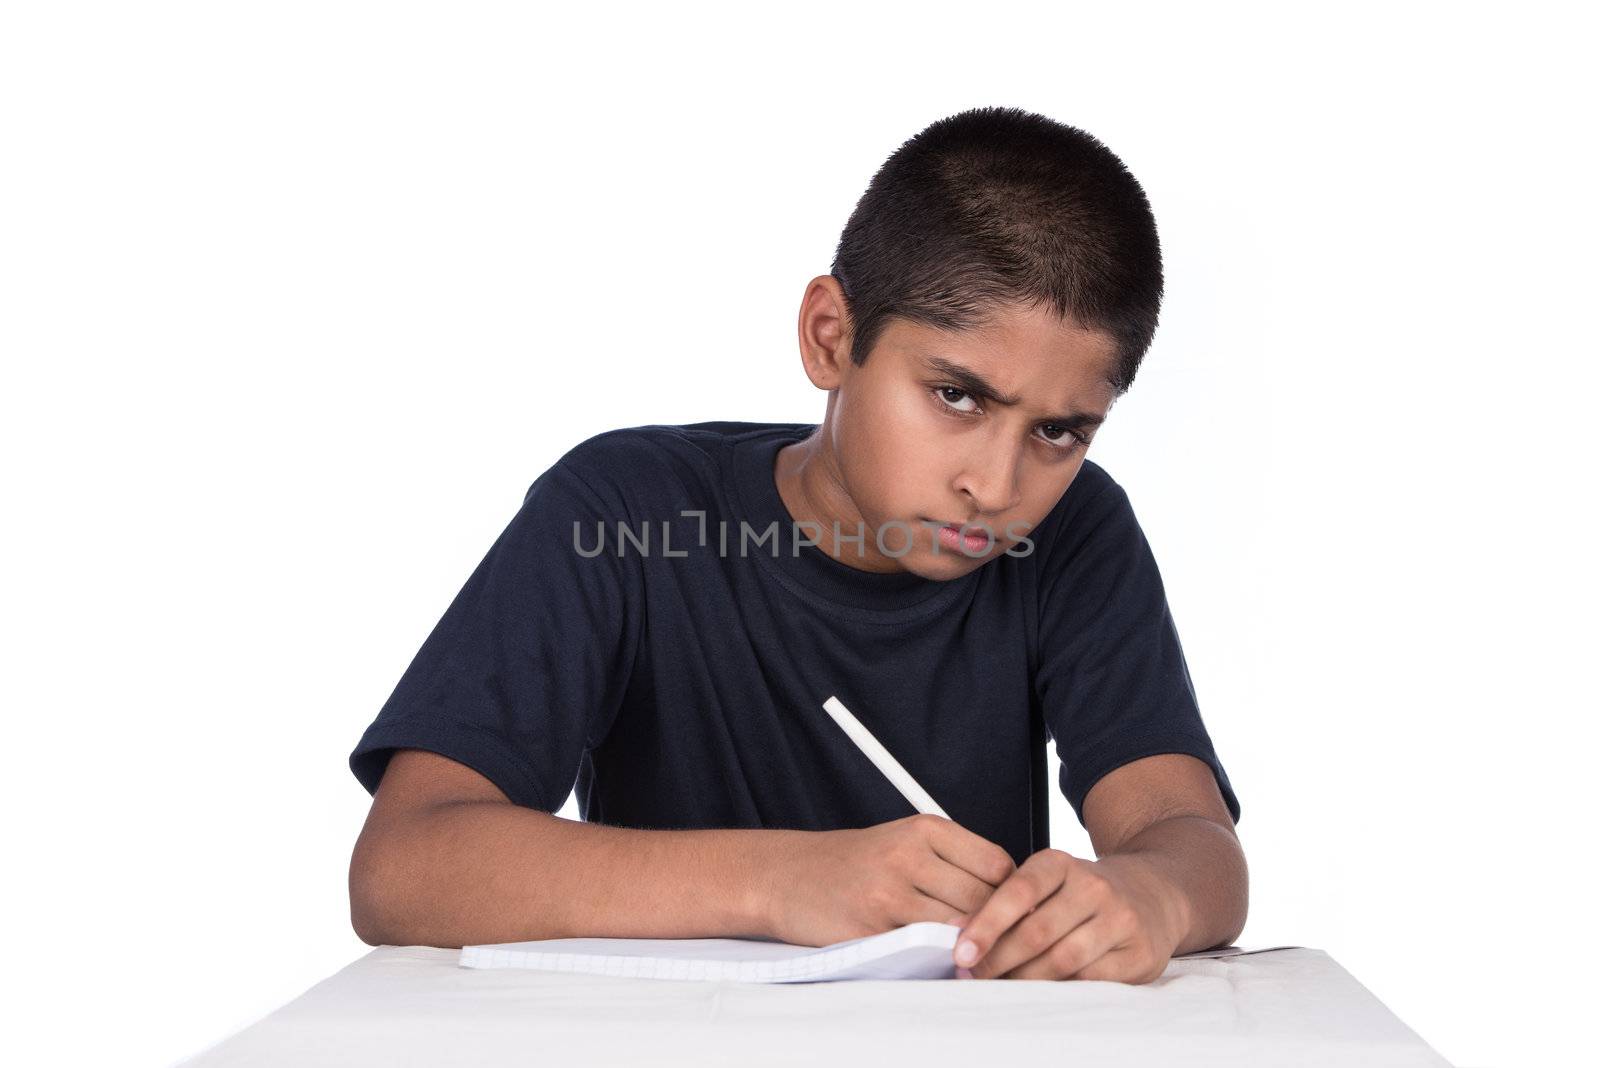 An handsome Indian kid doing his homework diligently, with ample copyspace